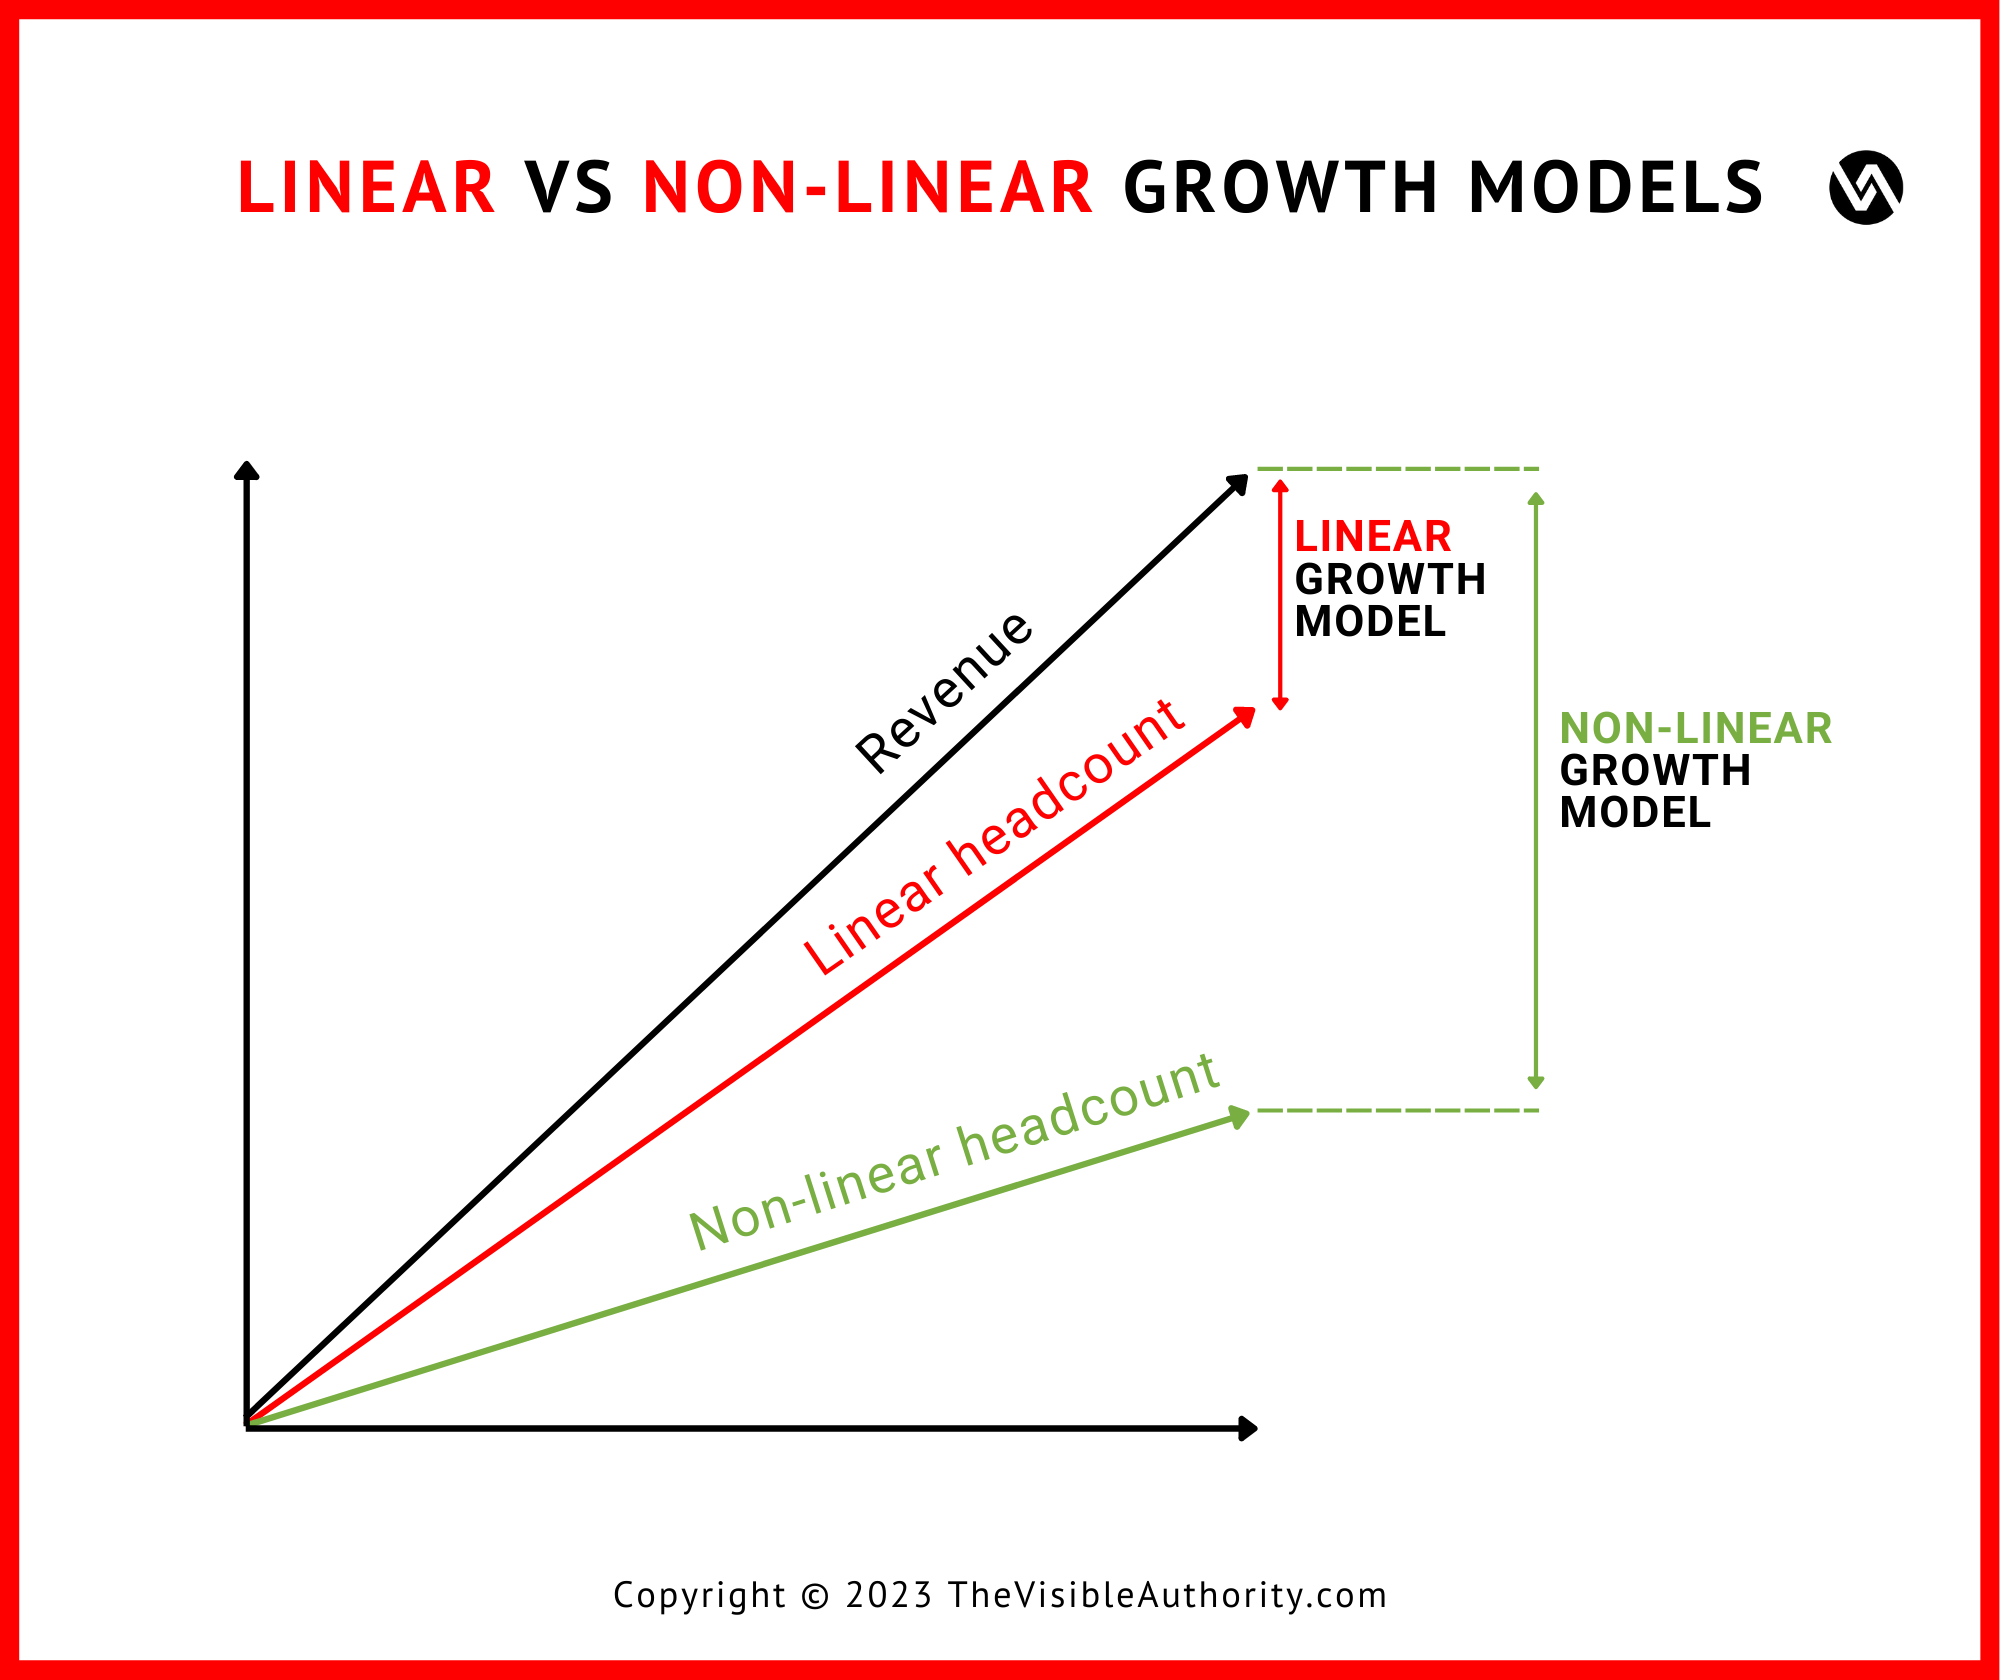 Linear vs Non-linear growth models